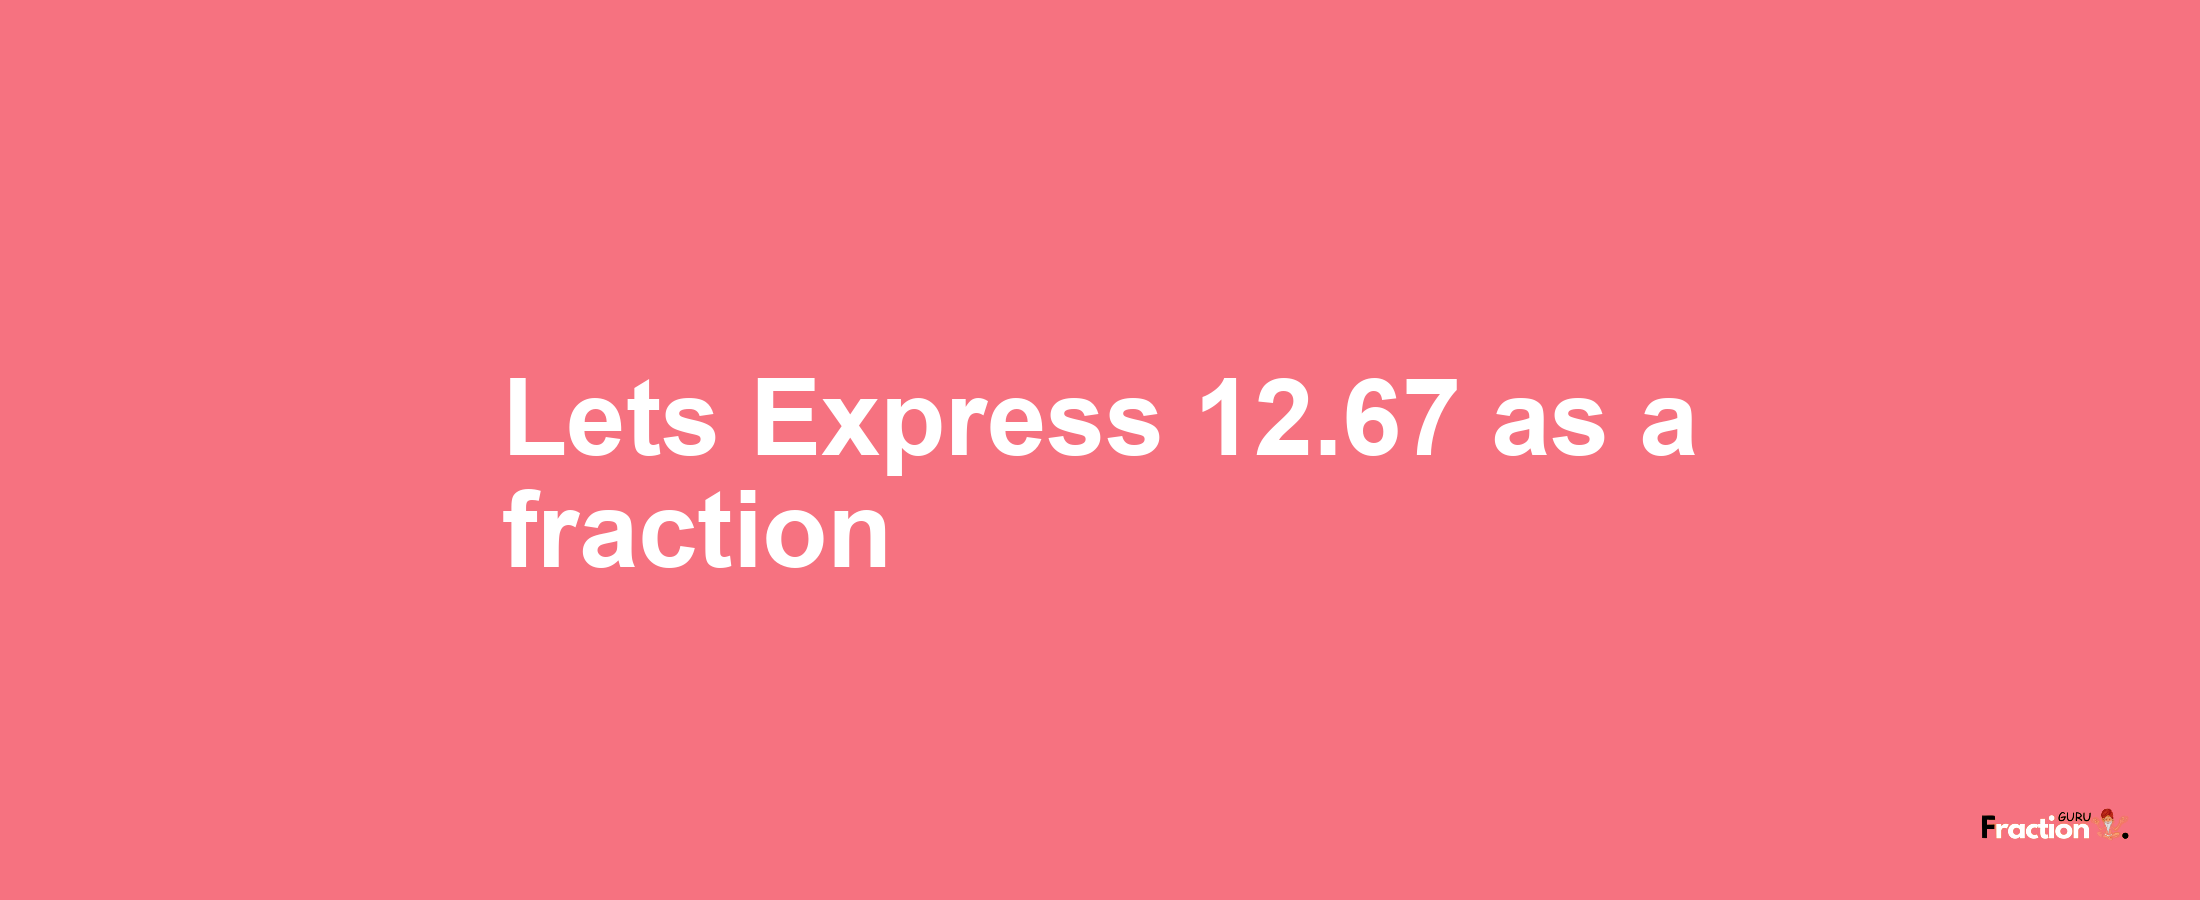 Lets Express 12.67 as afraction